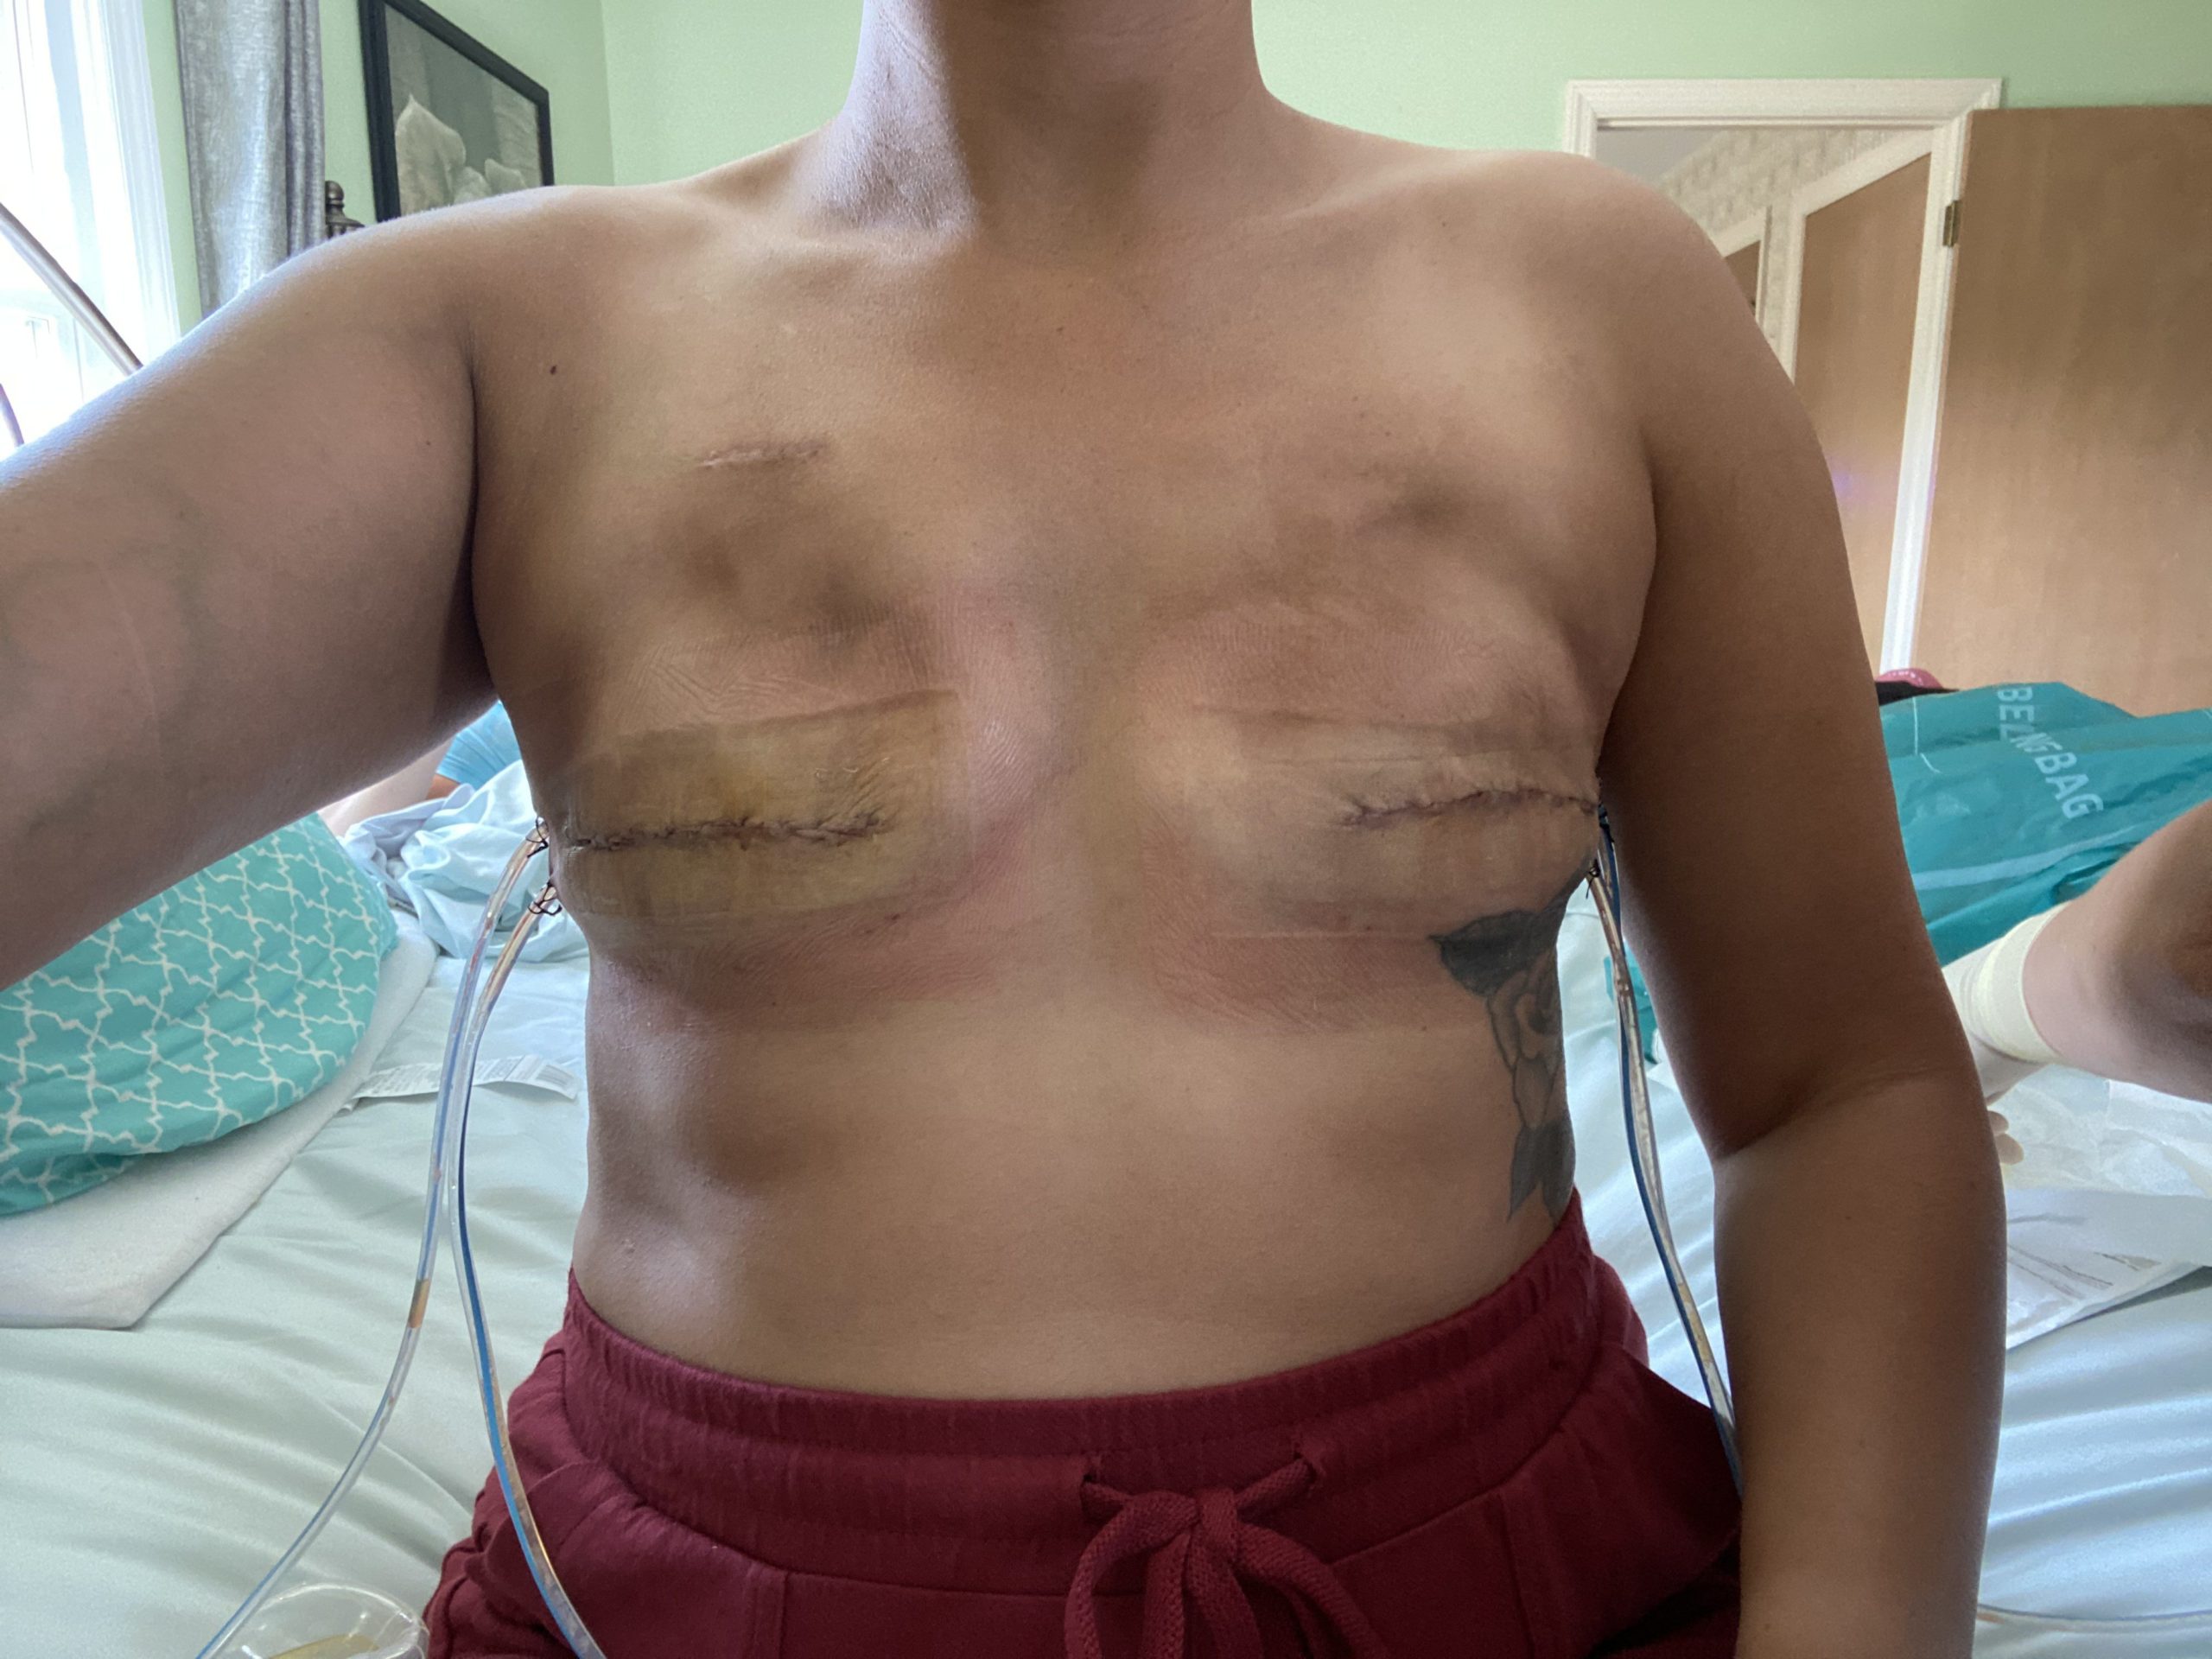 Double mastectomy, skin sparing, expanders placed